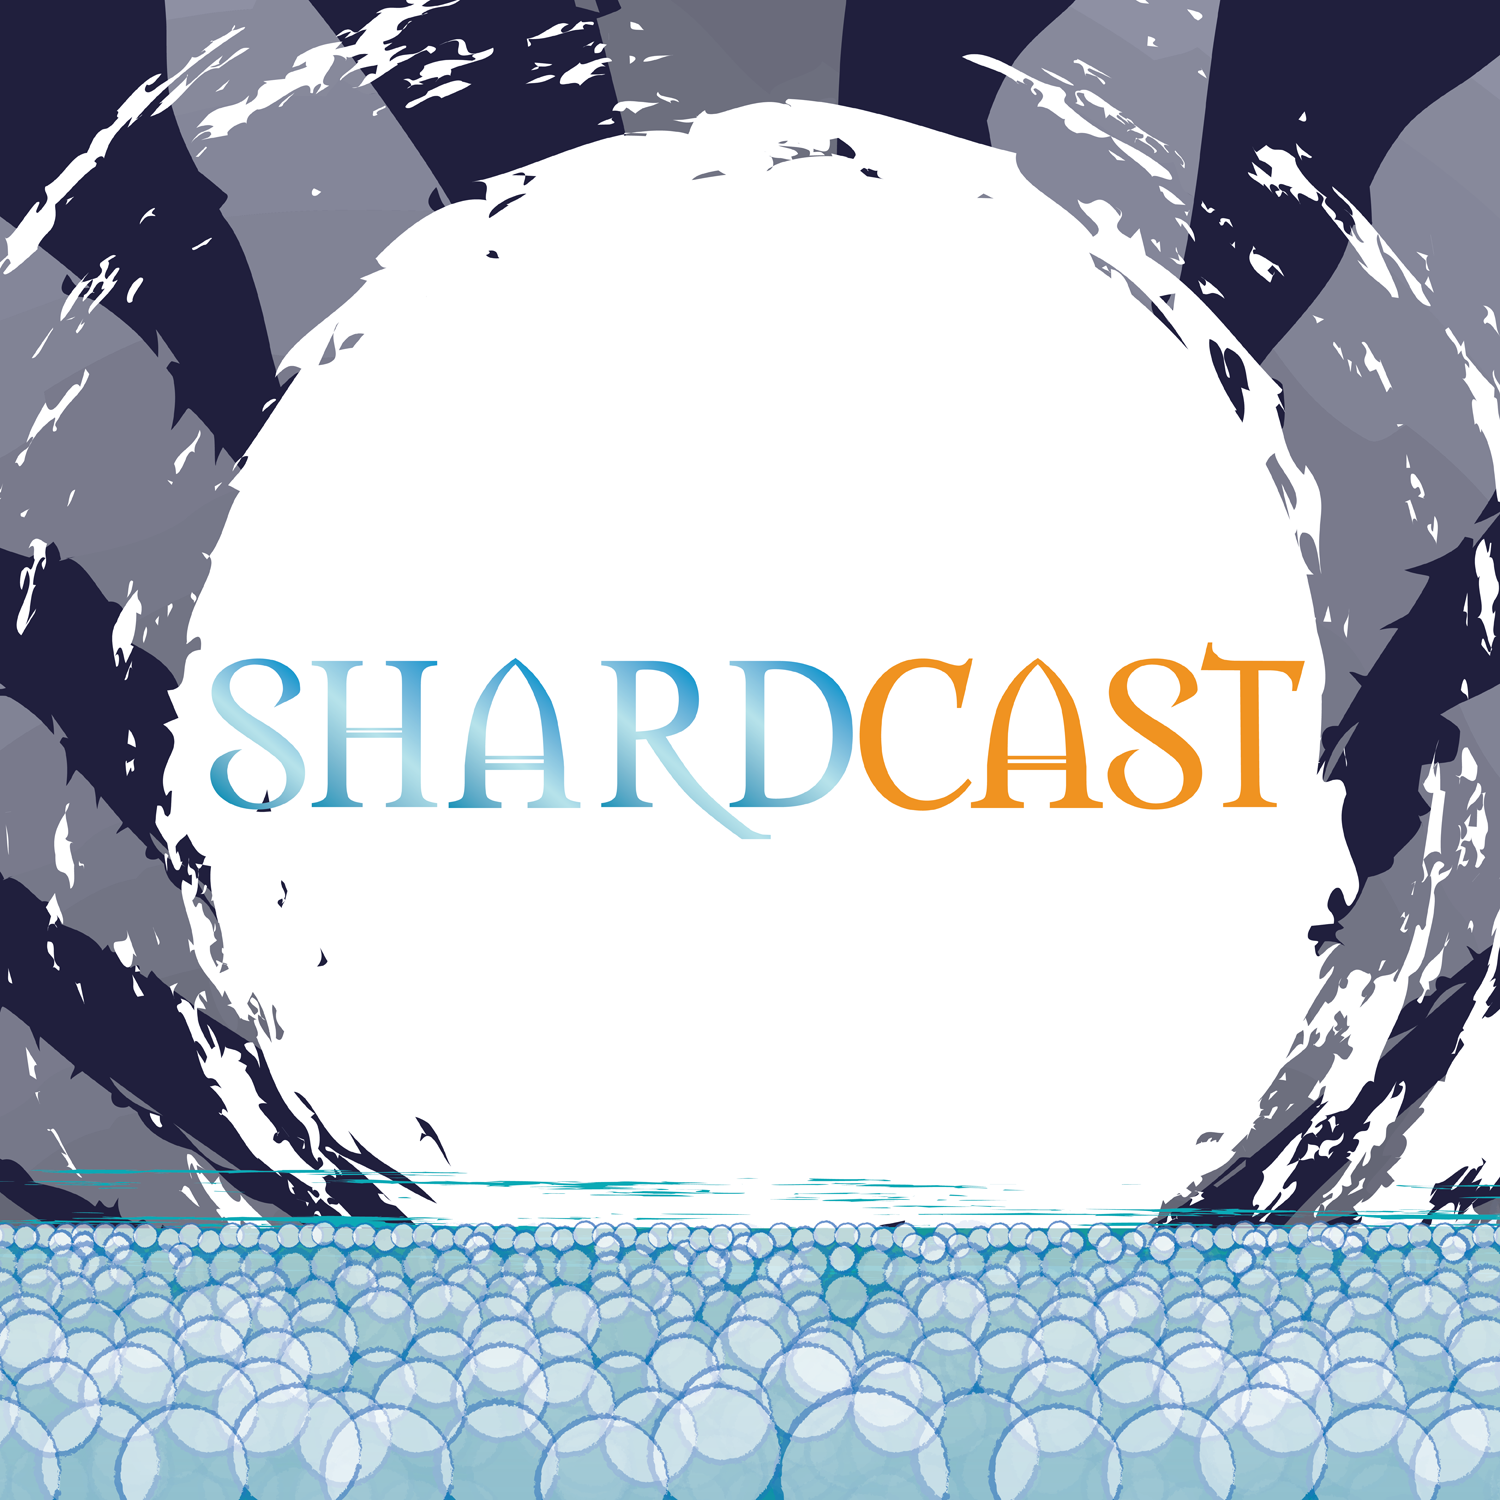 More information about "Shardcast: Cosmere Beefs 2 - Beef Stew"